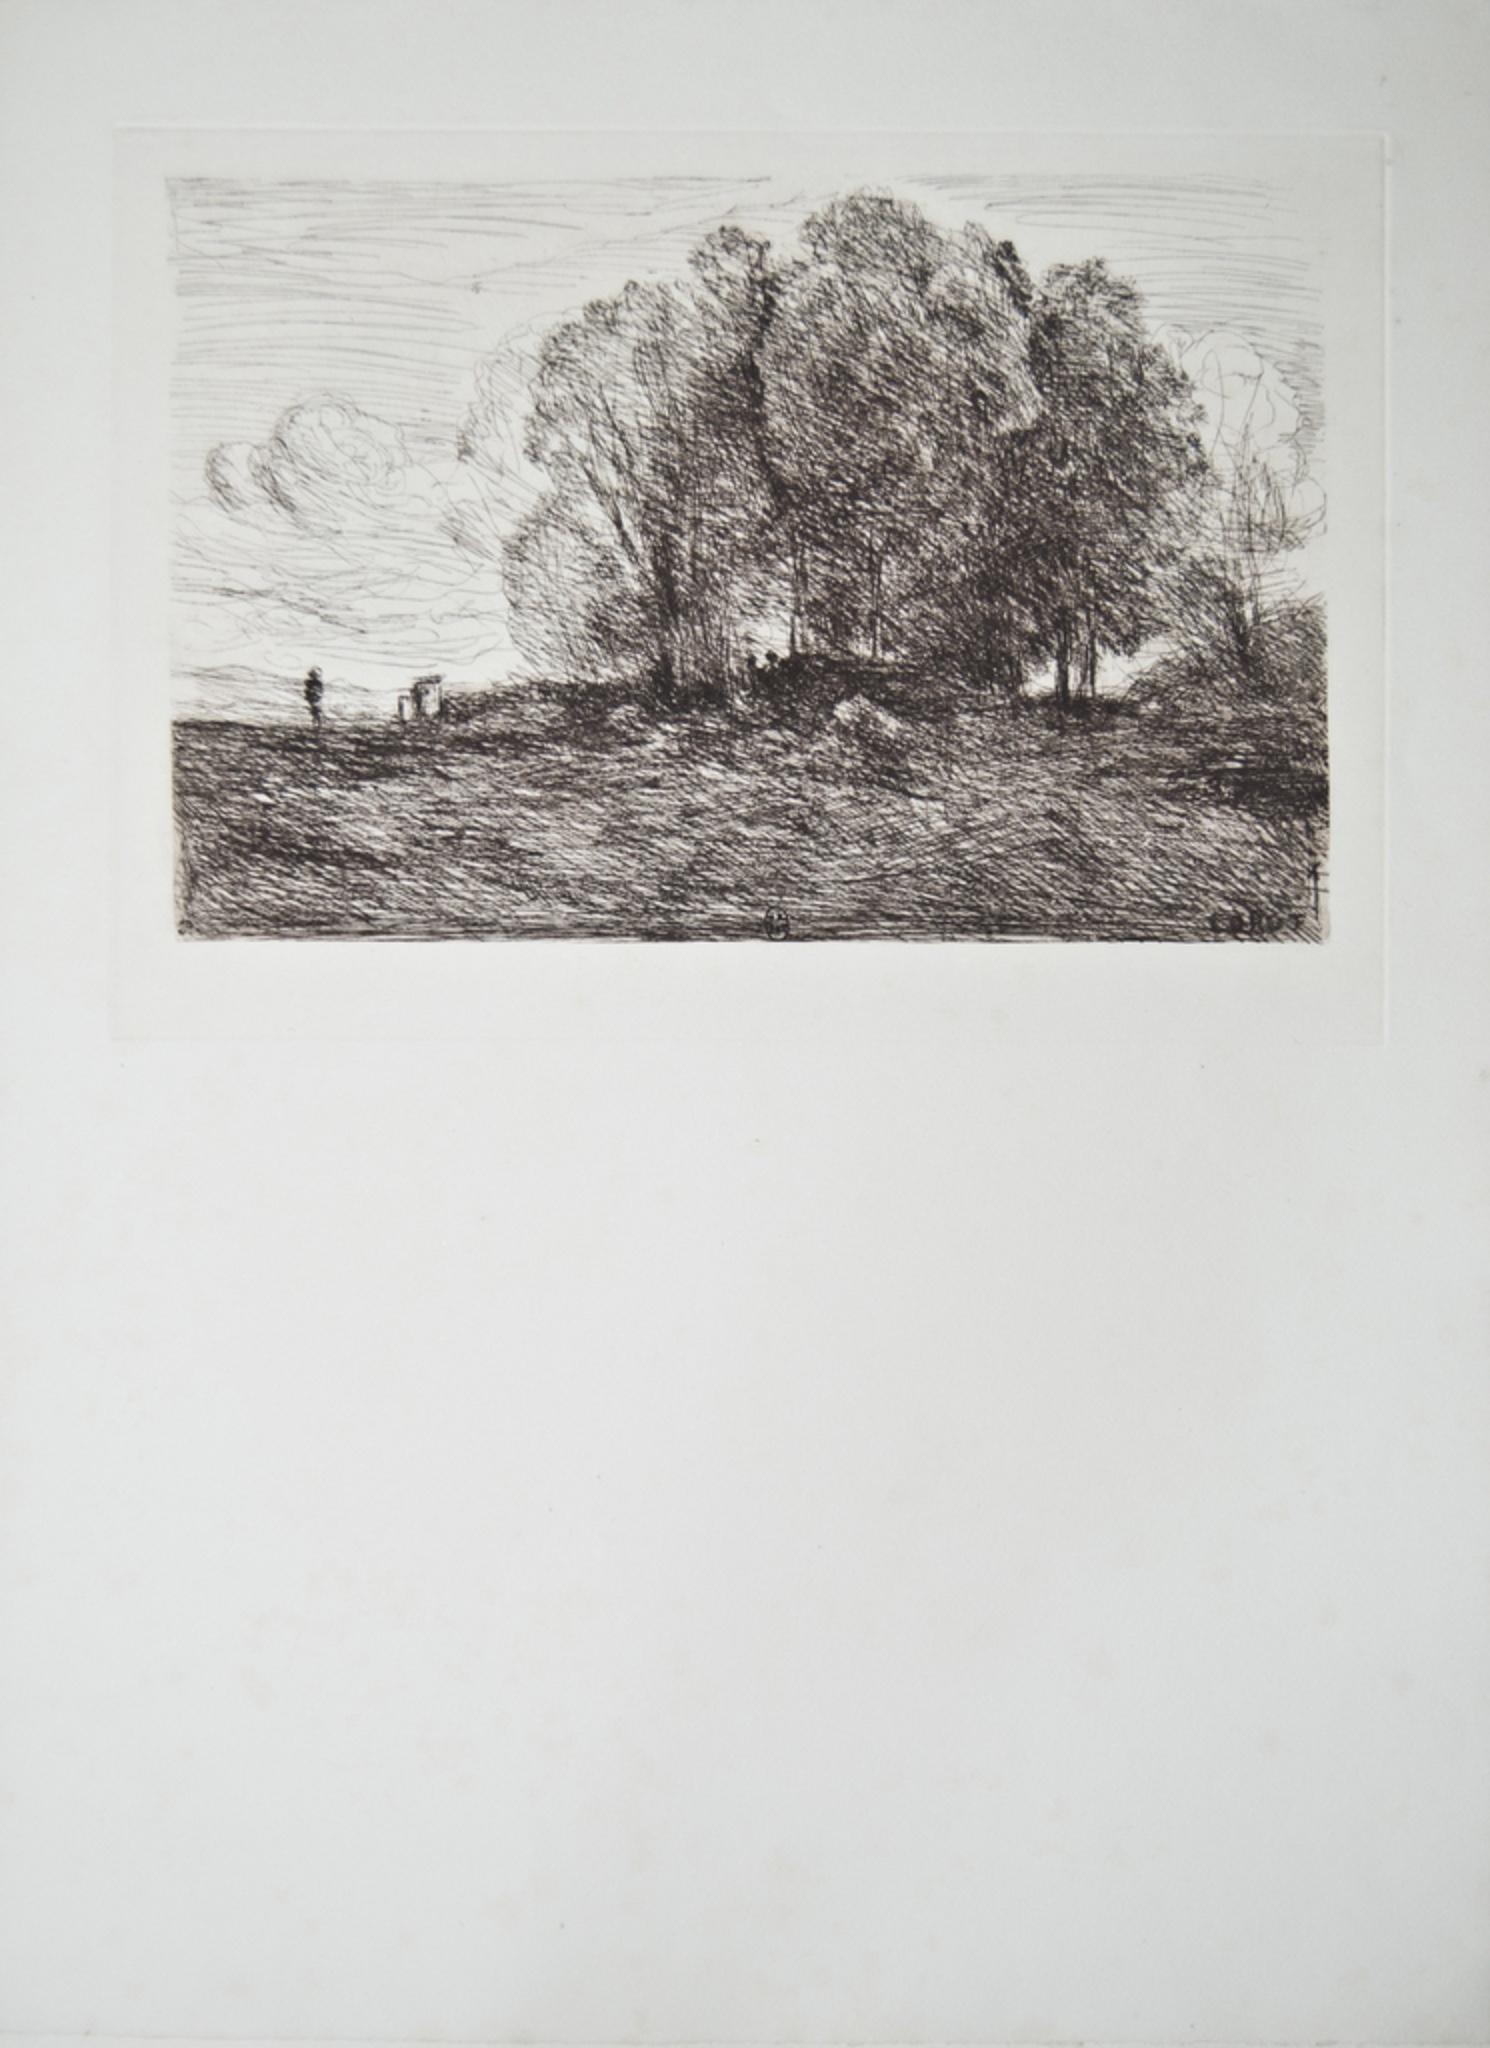 Landscape #4 -  Etching by Camille Corot - 1850s - Modern Print by Jean-Baptiste-Camille Corot